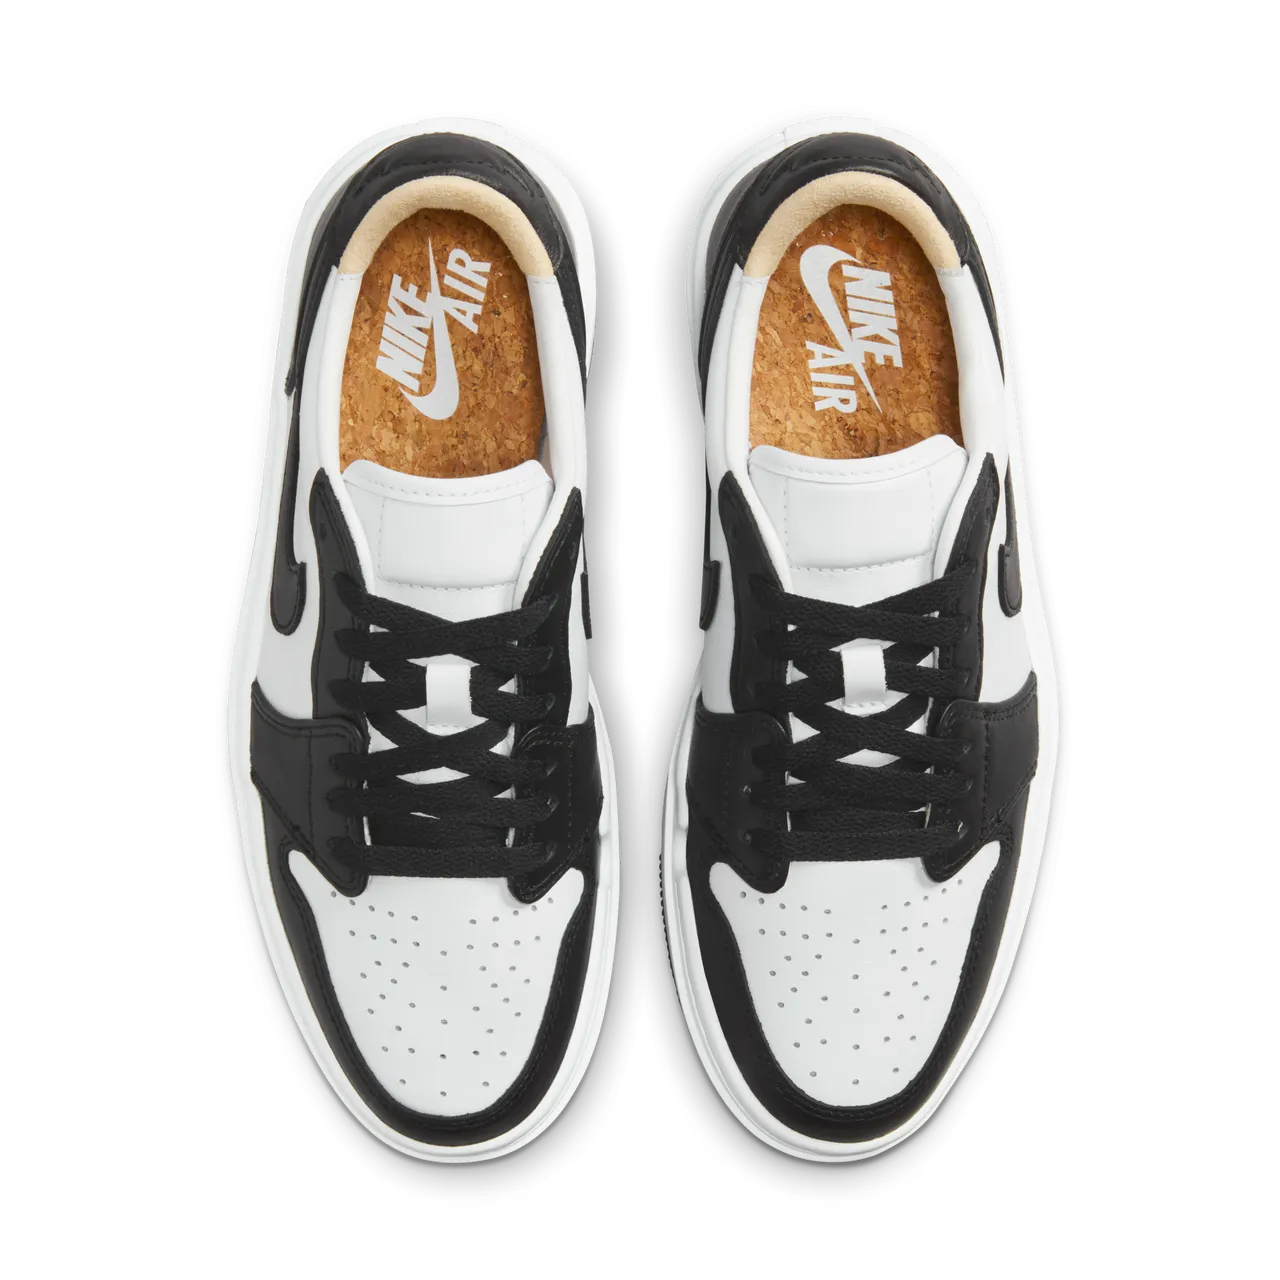 Air Jordan 1 Elevate Low Women's Shoes - White - Leather